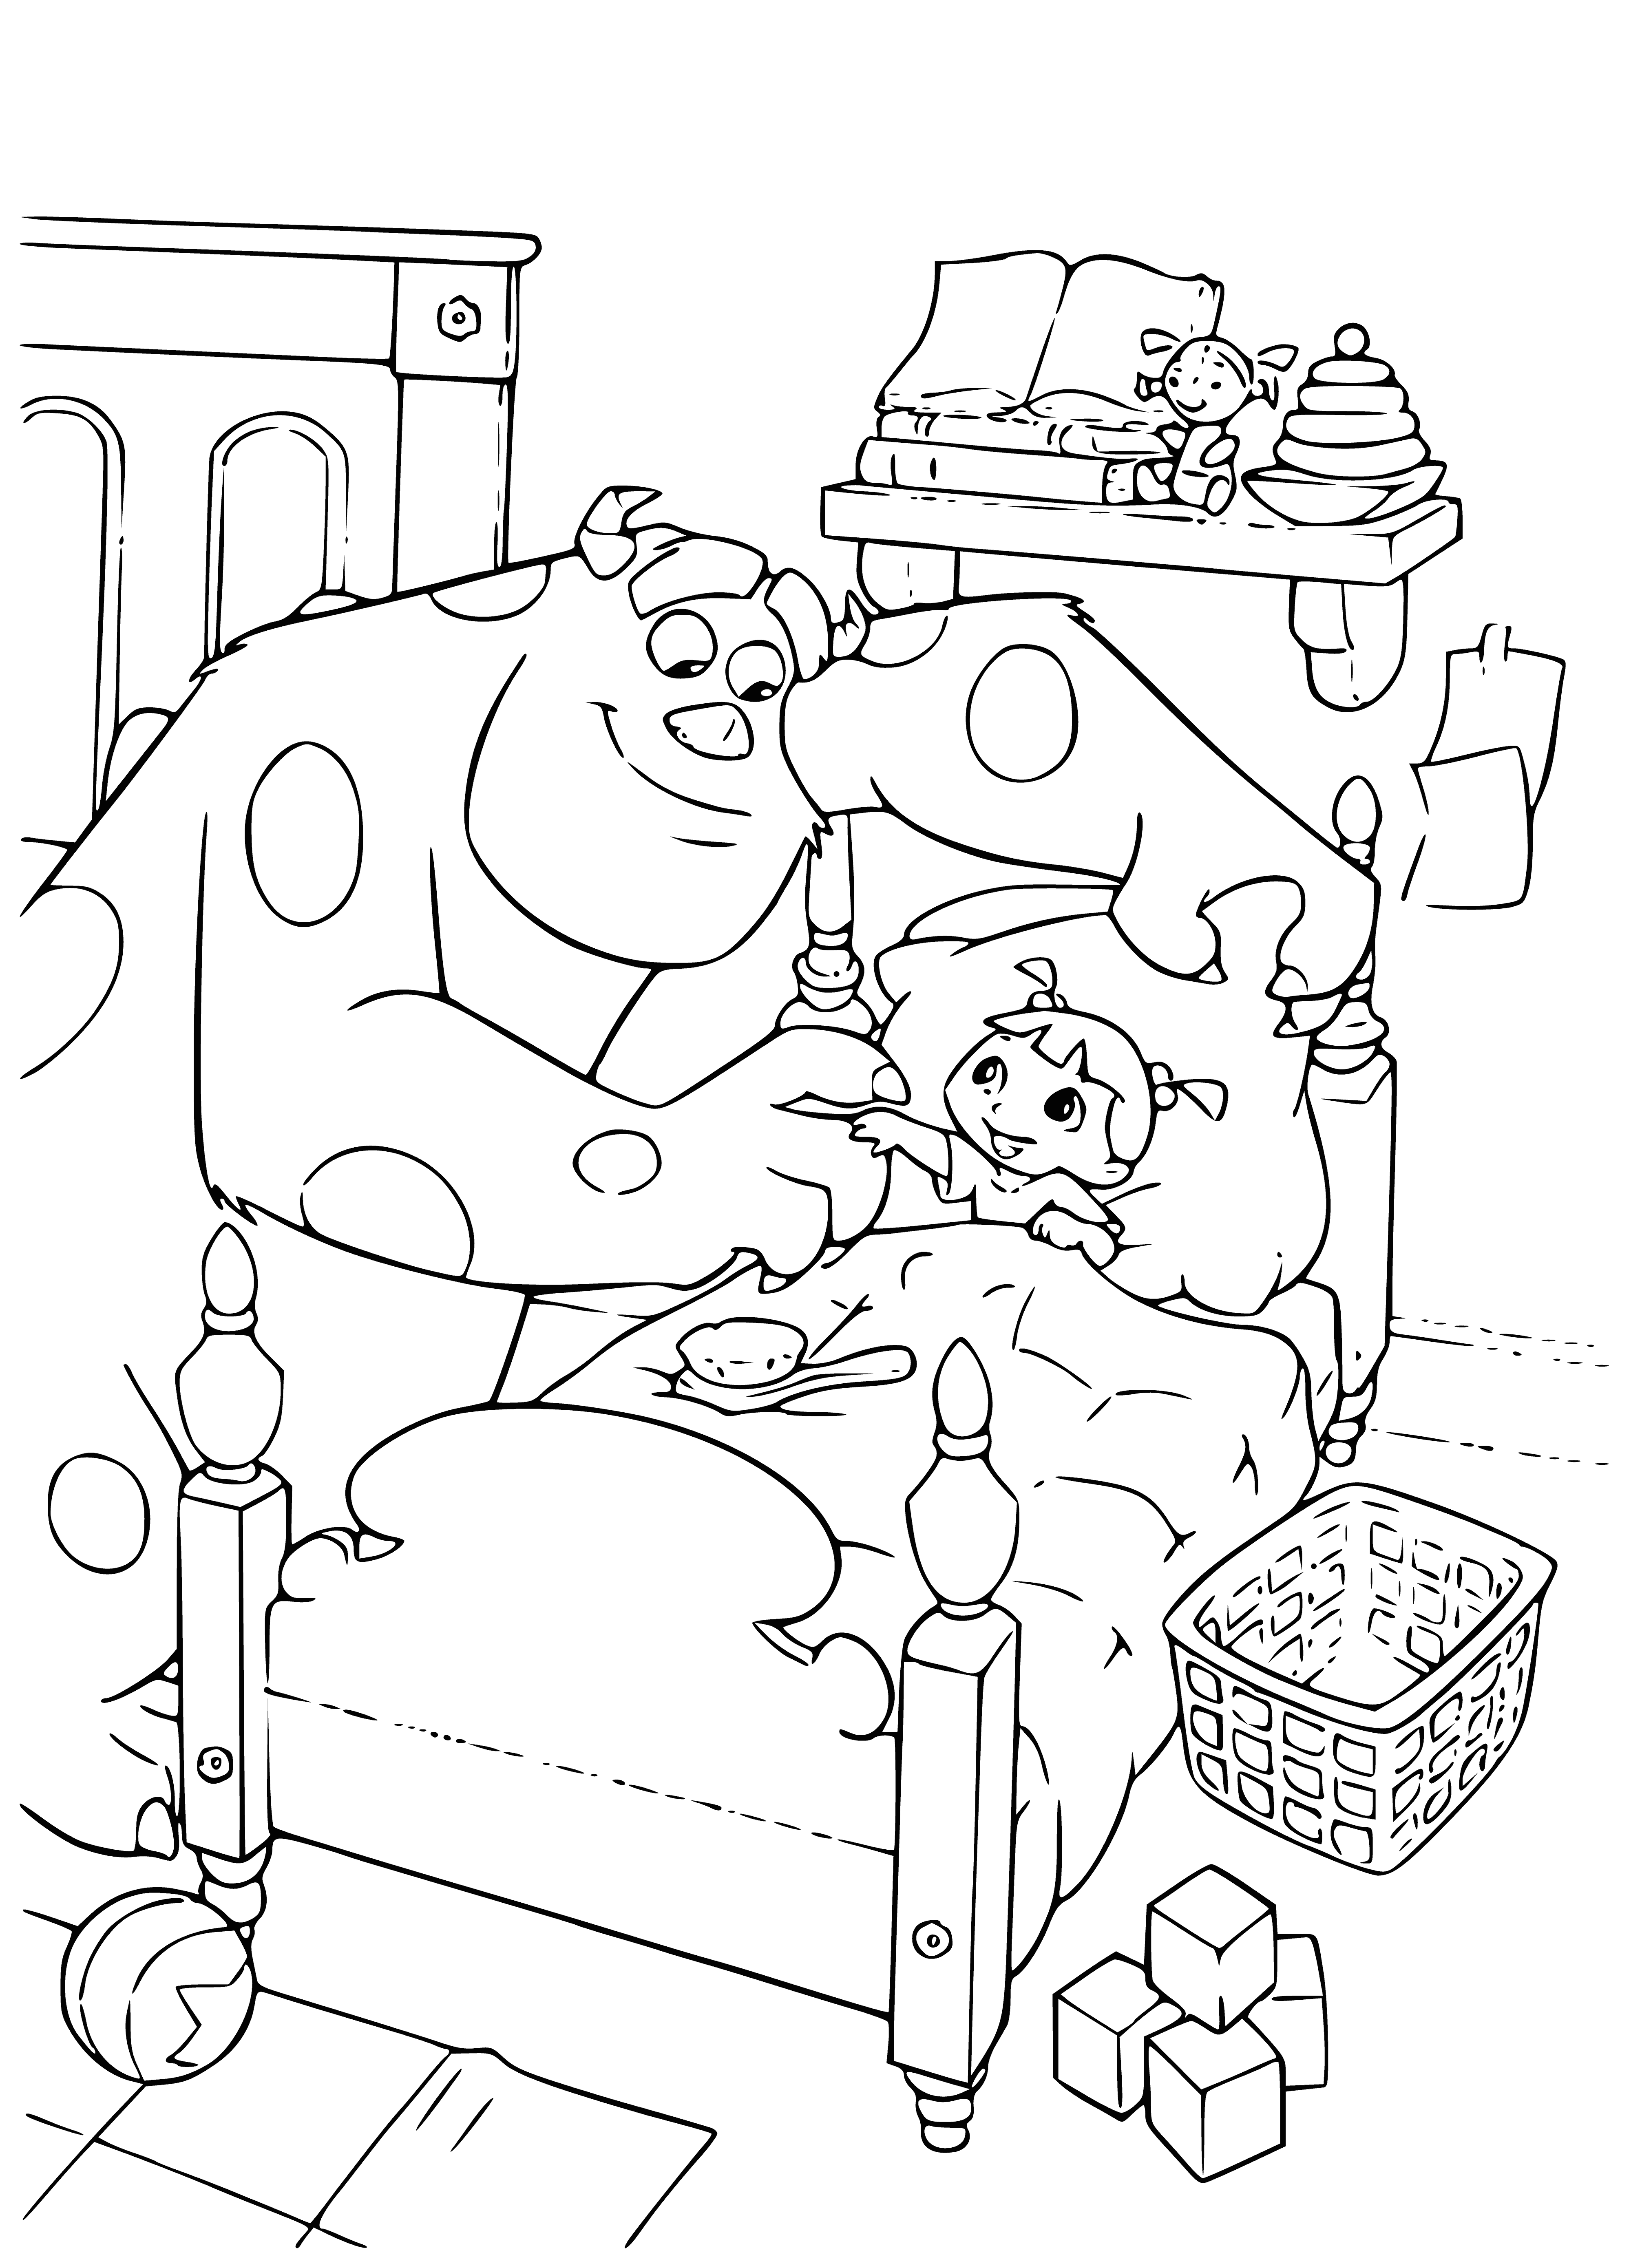 Girl home again coloring page